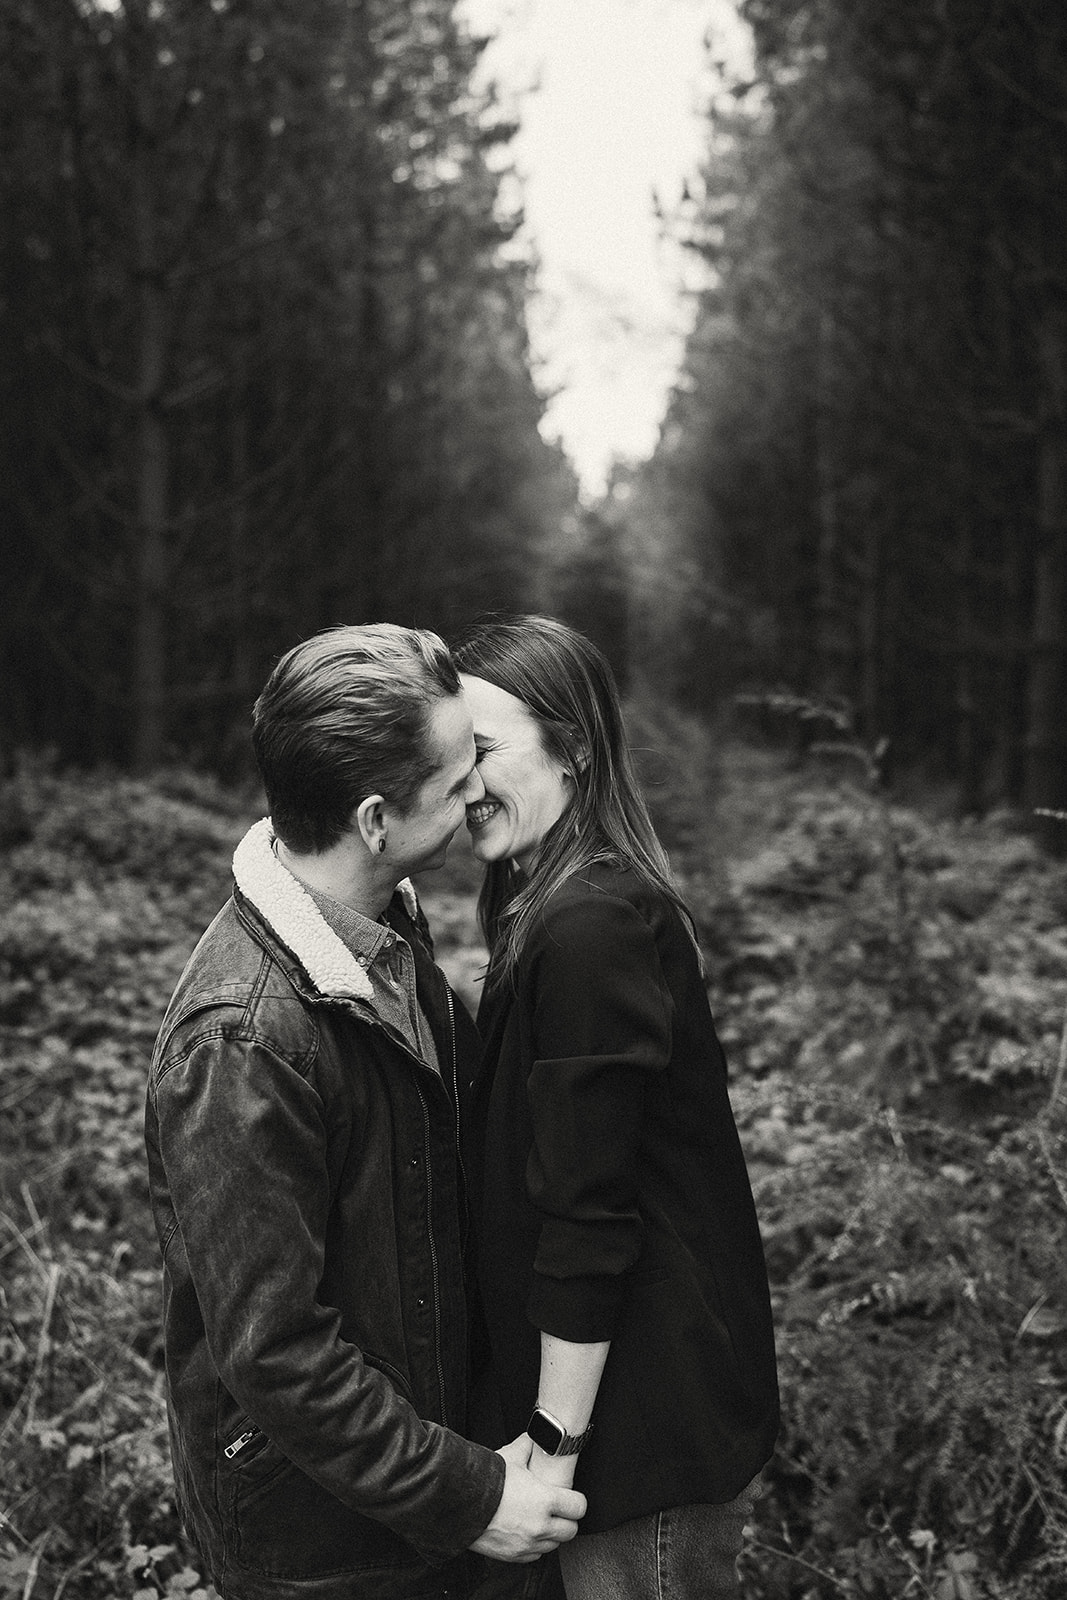 A Relaxed Nottingham Woodland Engagement shoot | Blidworth Woods